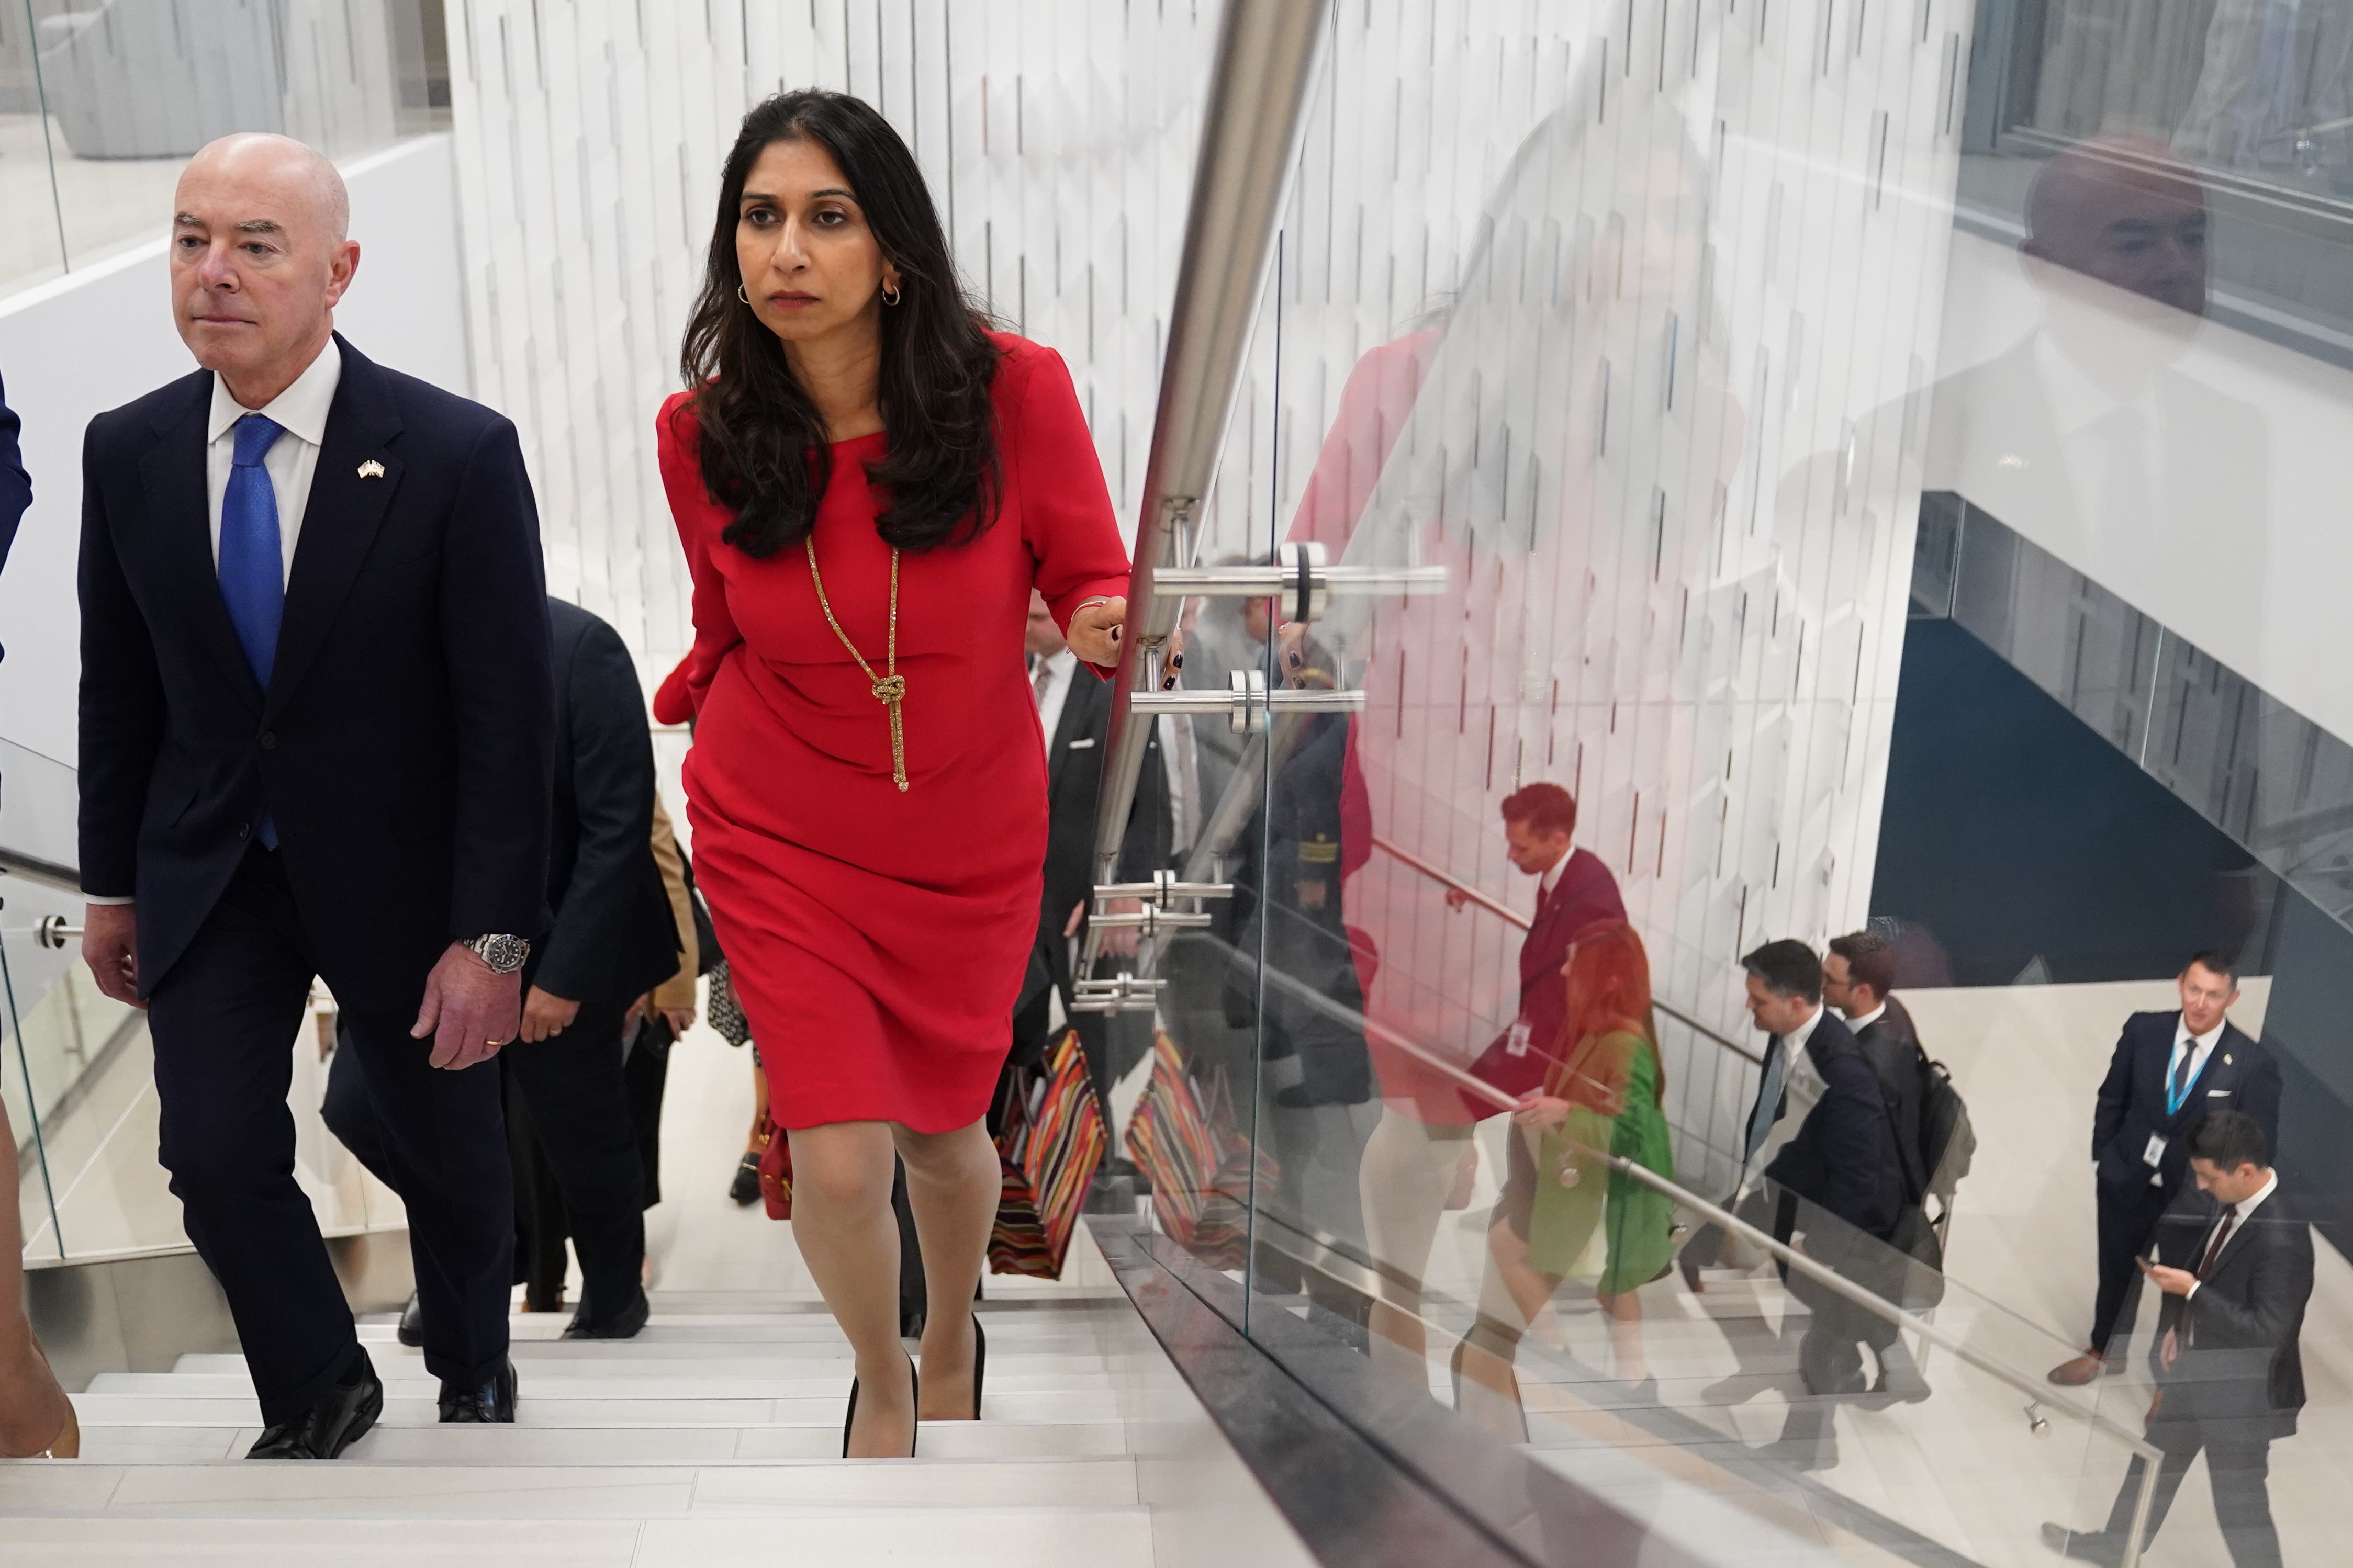 Home Secretary Suella Braverman with United States Secretary of Homeland Security Alejandro Mayorkas at National Center for Missing & Exploited Children during her three-day visit to the US (Stefan Rousseau/PA)